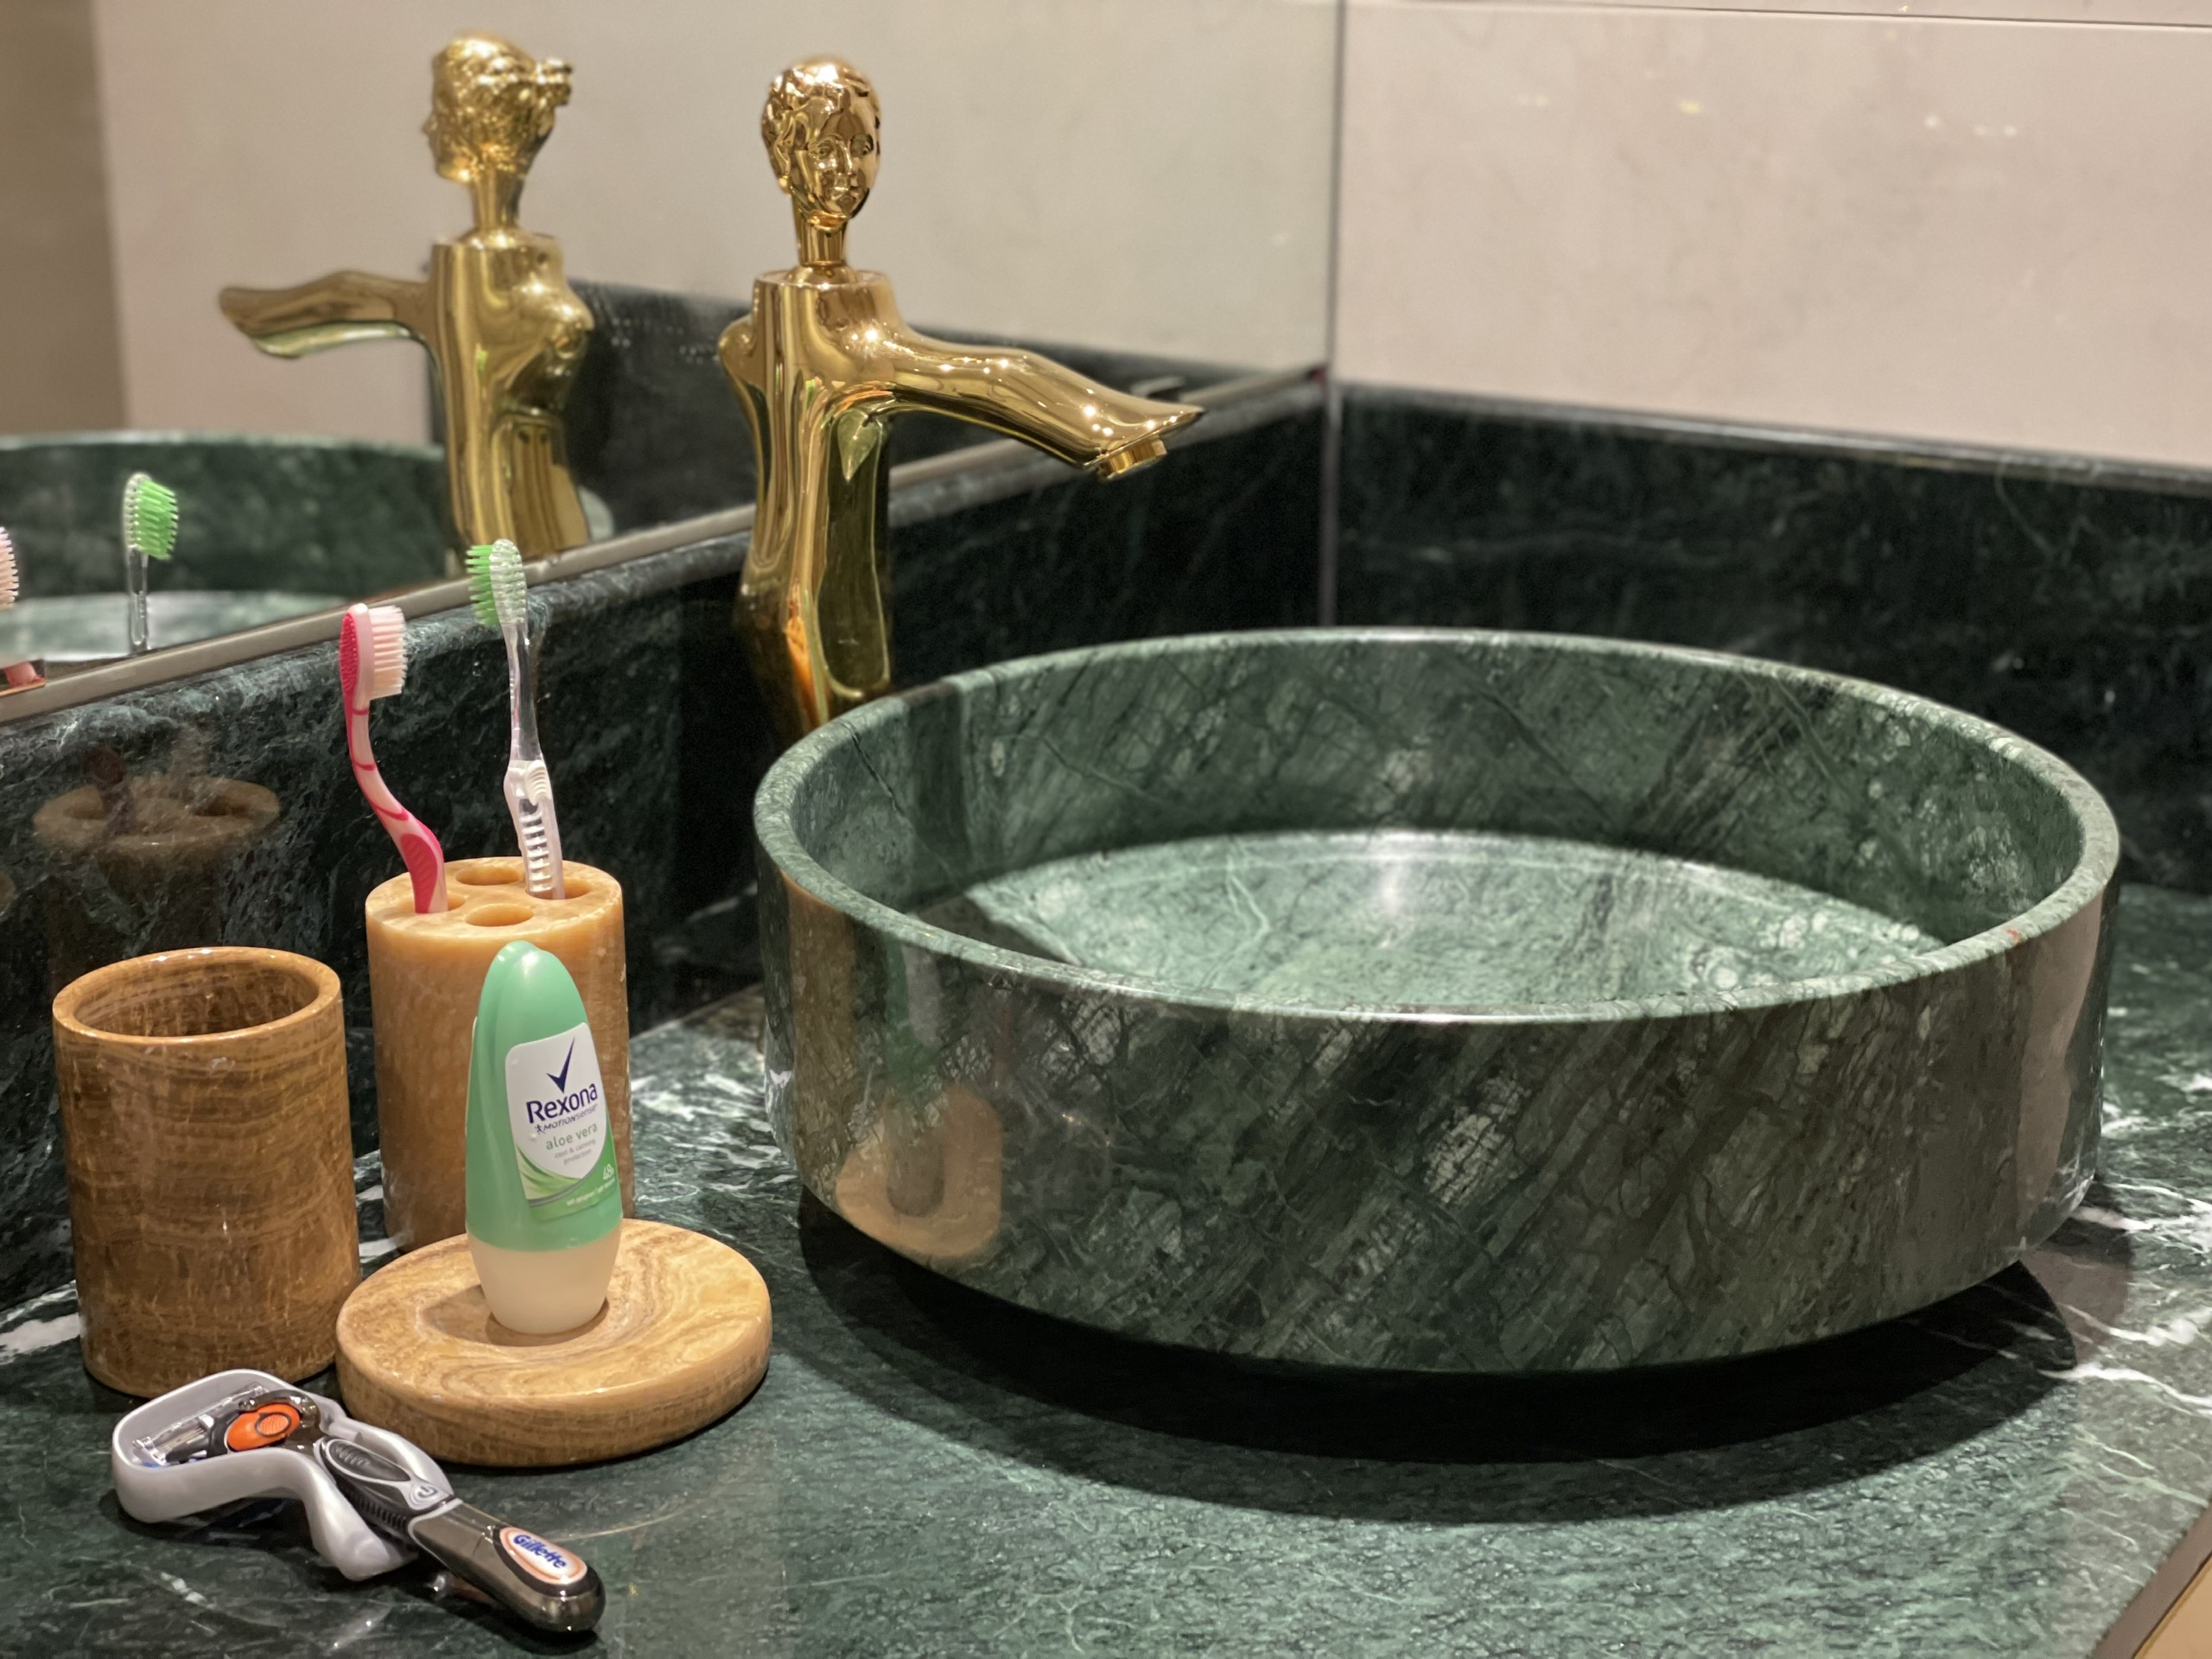 BENEFITS OF HAVING A NATURAL STONE BATHROOM SINK